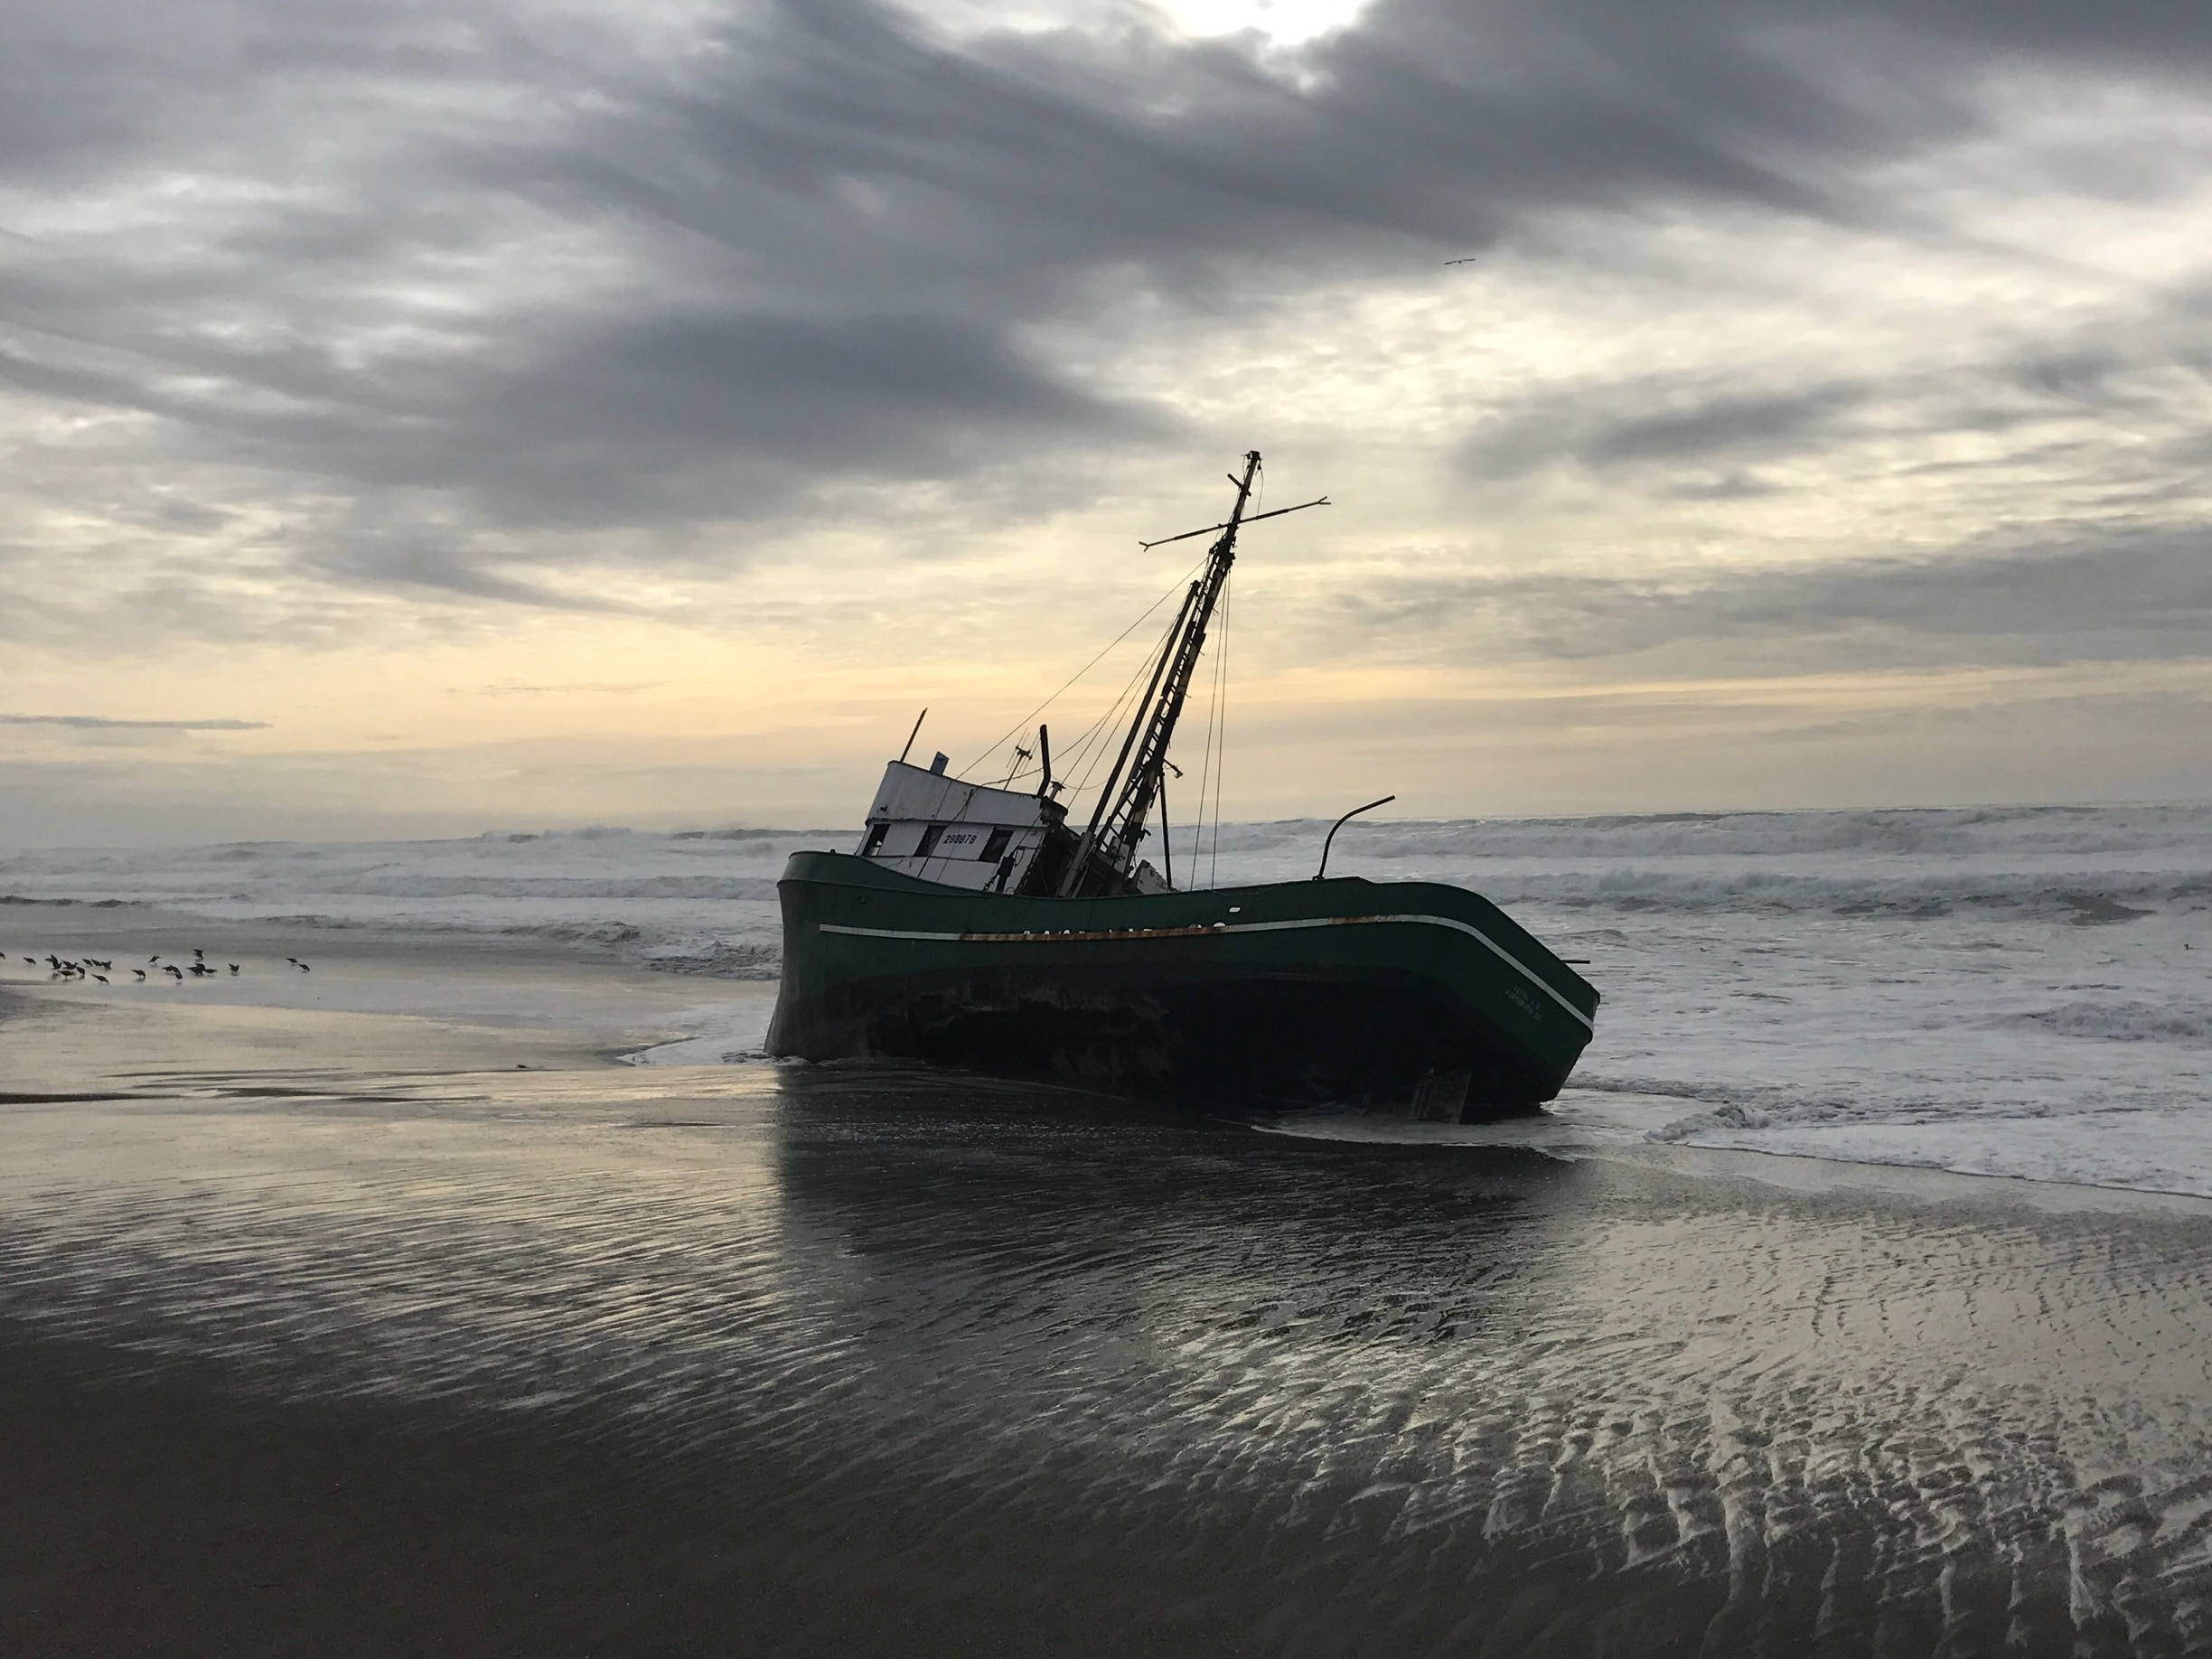 Shipwreck on a Bodega Beach. I've been coming to this beach since I was a kid and this was by far the coolest thing I've seen. #weekendgetaway